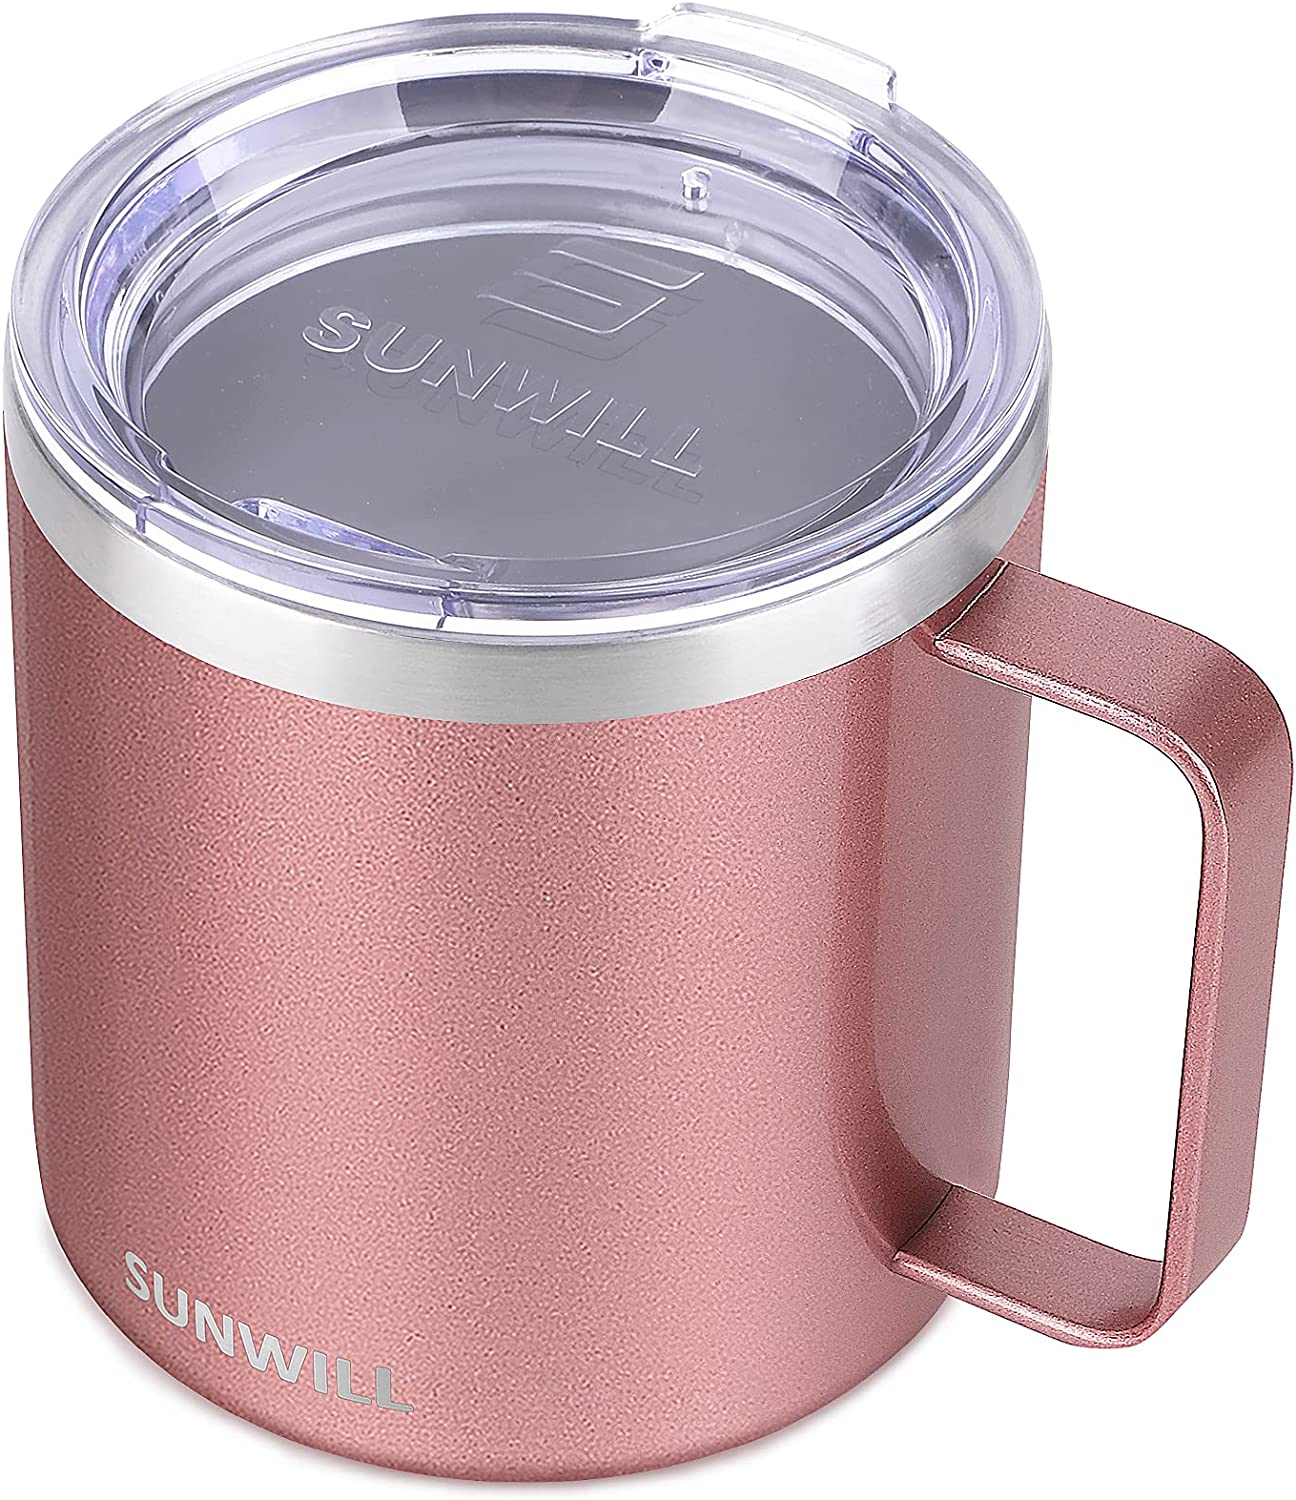 SUNWILL Coffee Travel Mug with Handle, Stainless Steel Insulated Cup  Tumbler, 22oz, Powder Coated Mint 